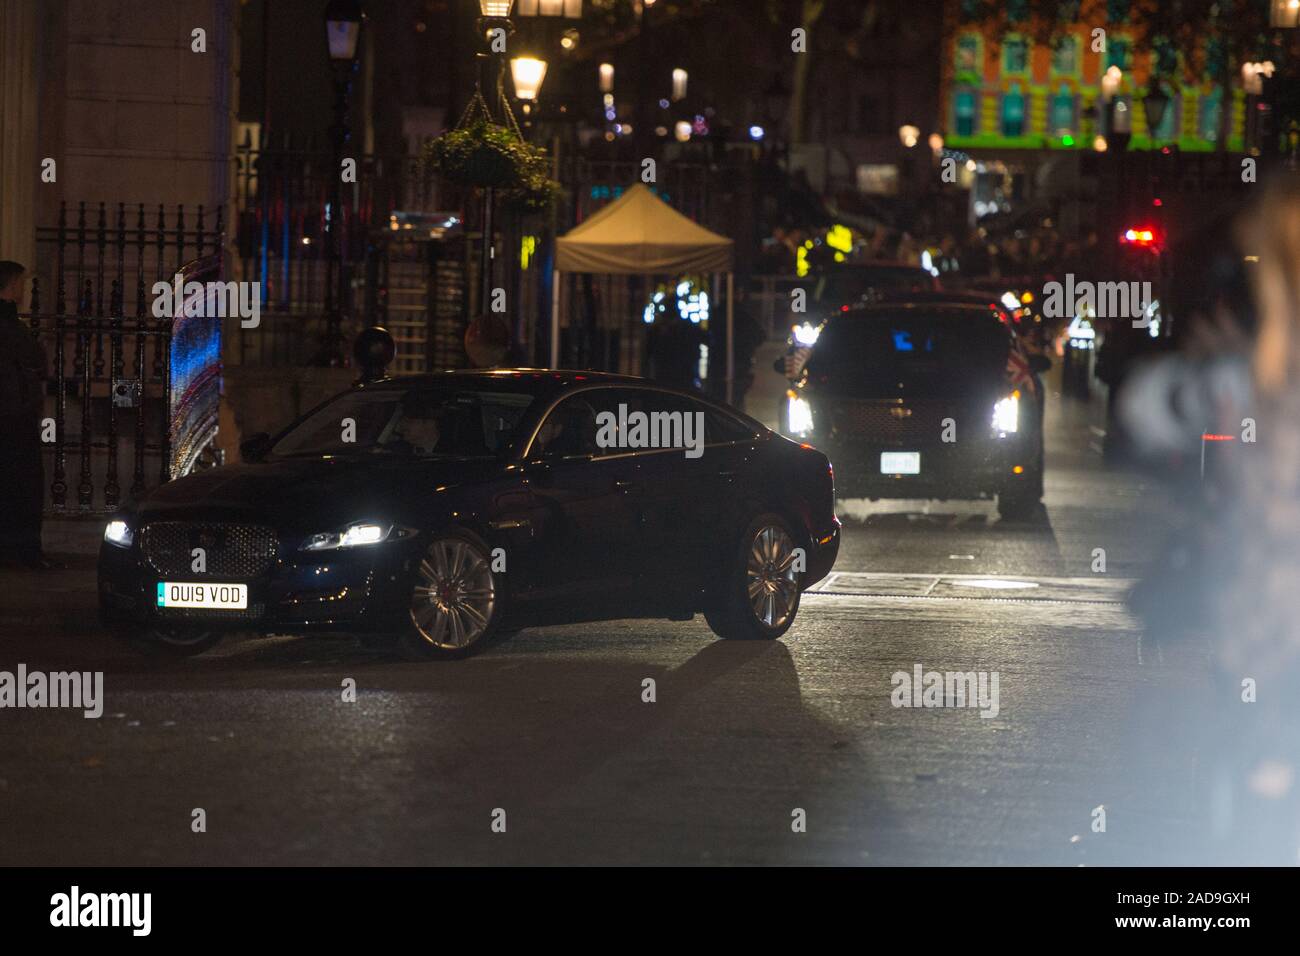 London, UK. 3 December 2019.  Pictured: President Donald Trump’s official Car, AKA, ‘The Beast’.  Boris Johnson, UK Prime Minister hosts a reception with foreign leaders ahead of the NATO (North Atlantic Treaty Organisation) meeting on the 4th December. Credit: Colin Fisher/Alamy Live News. Stock Photo